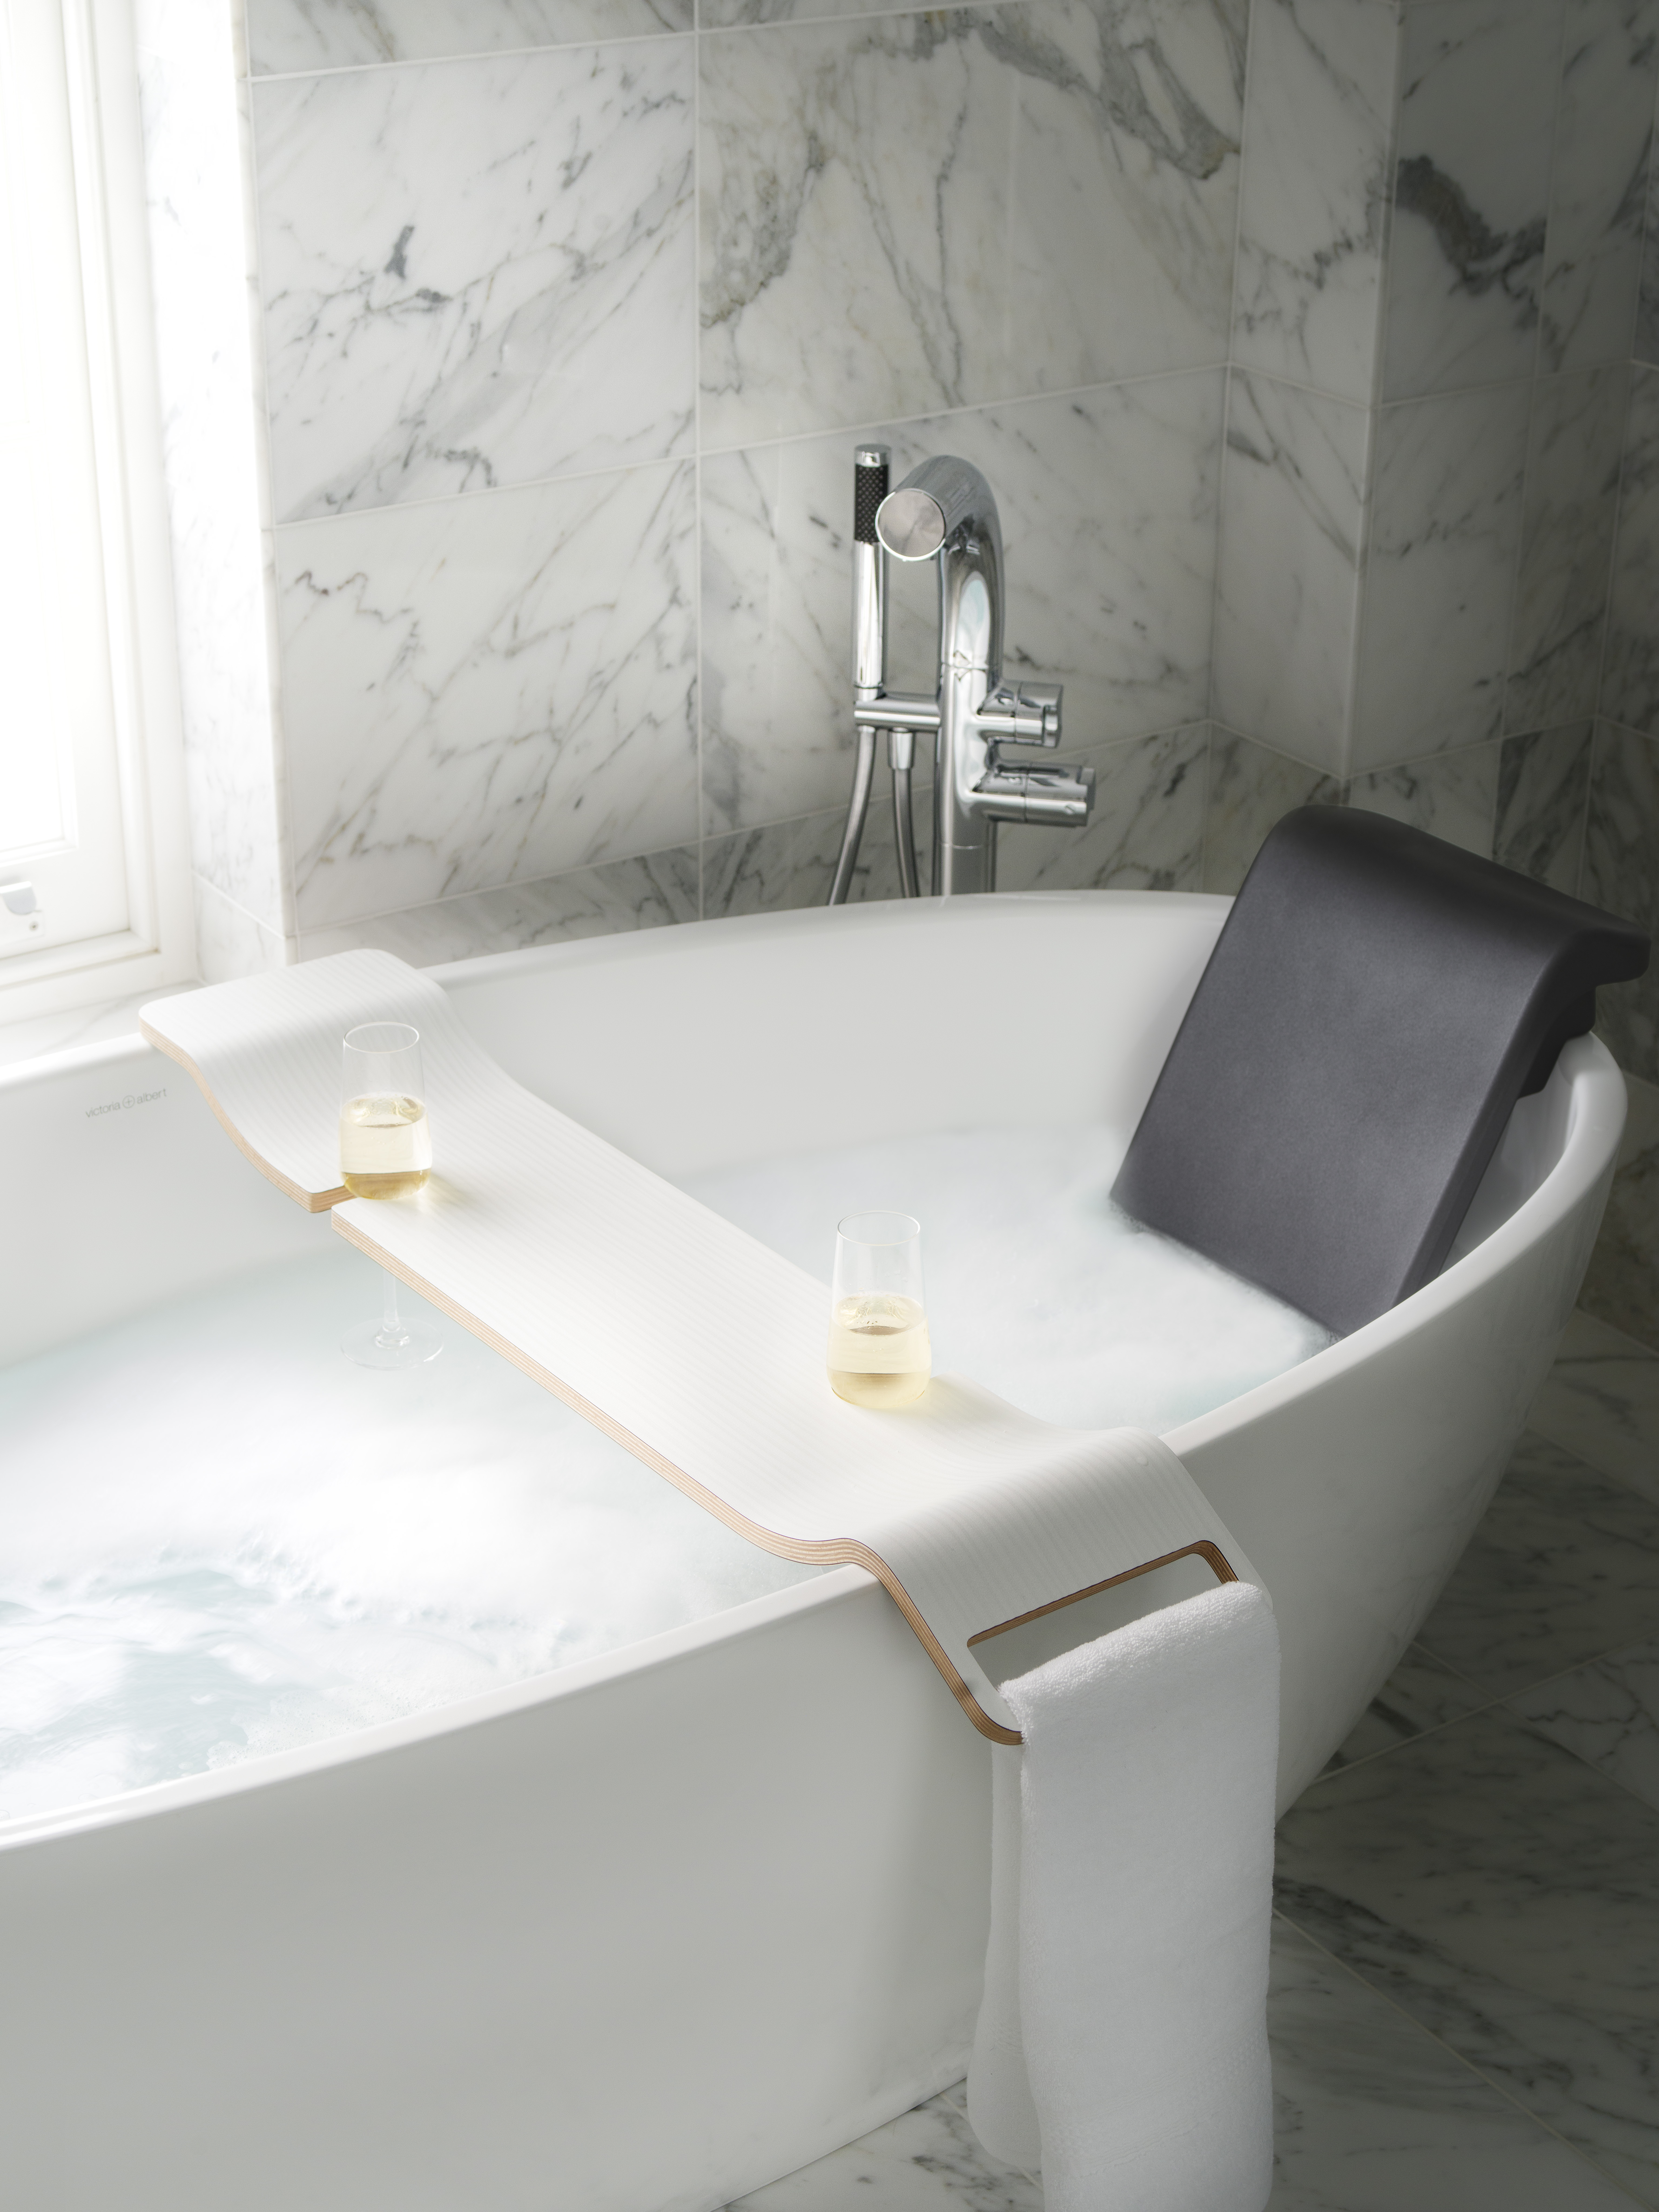 image of filled freestanding bath with water, bath rack, glasses of wine and a towel hanging